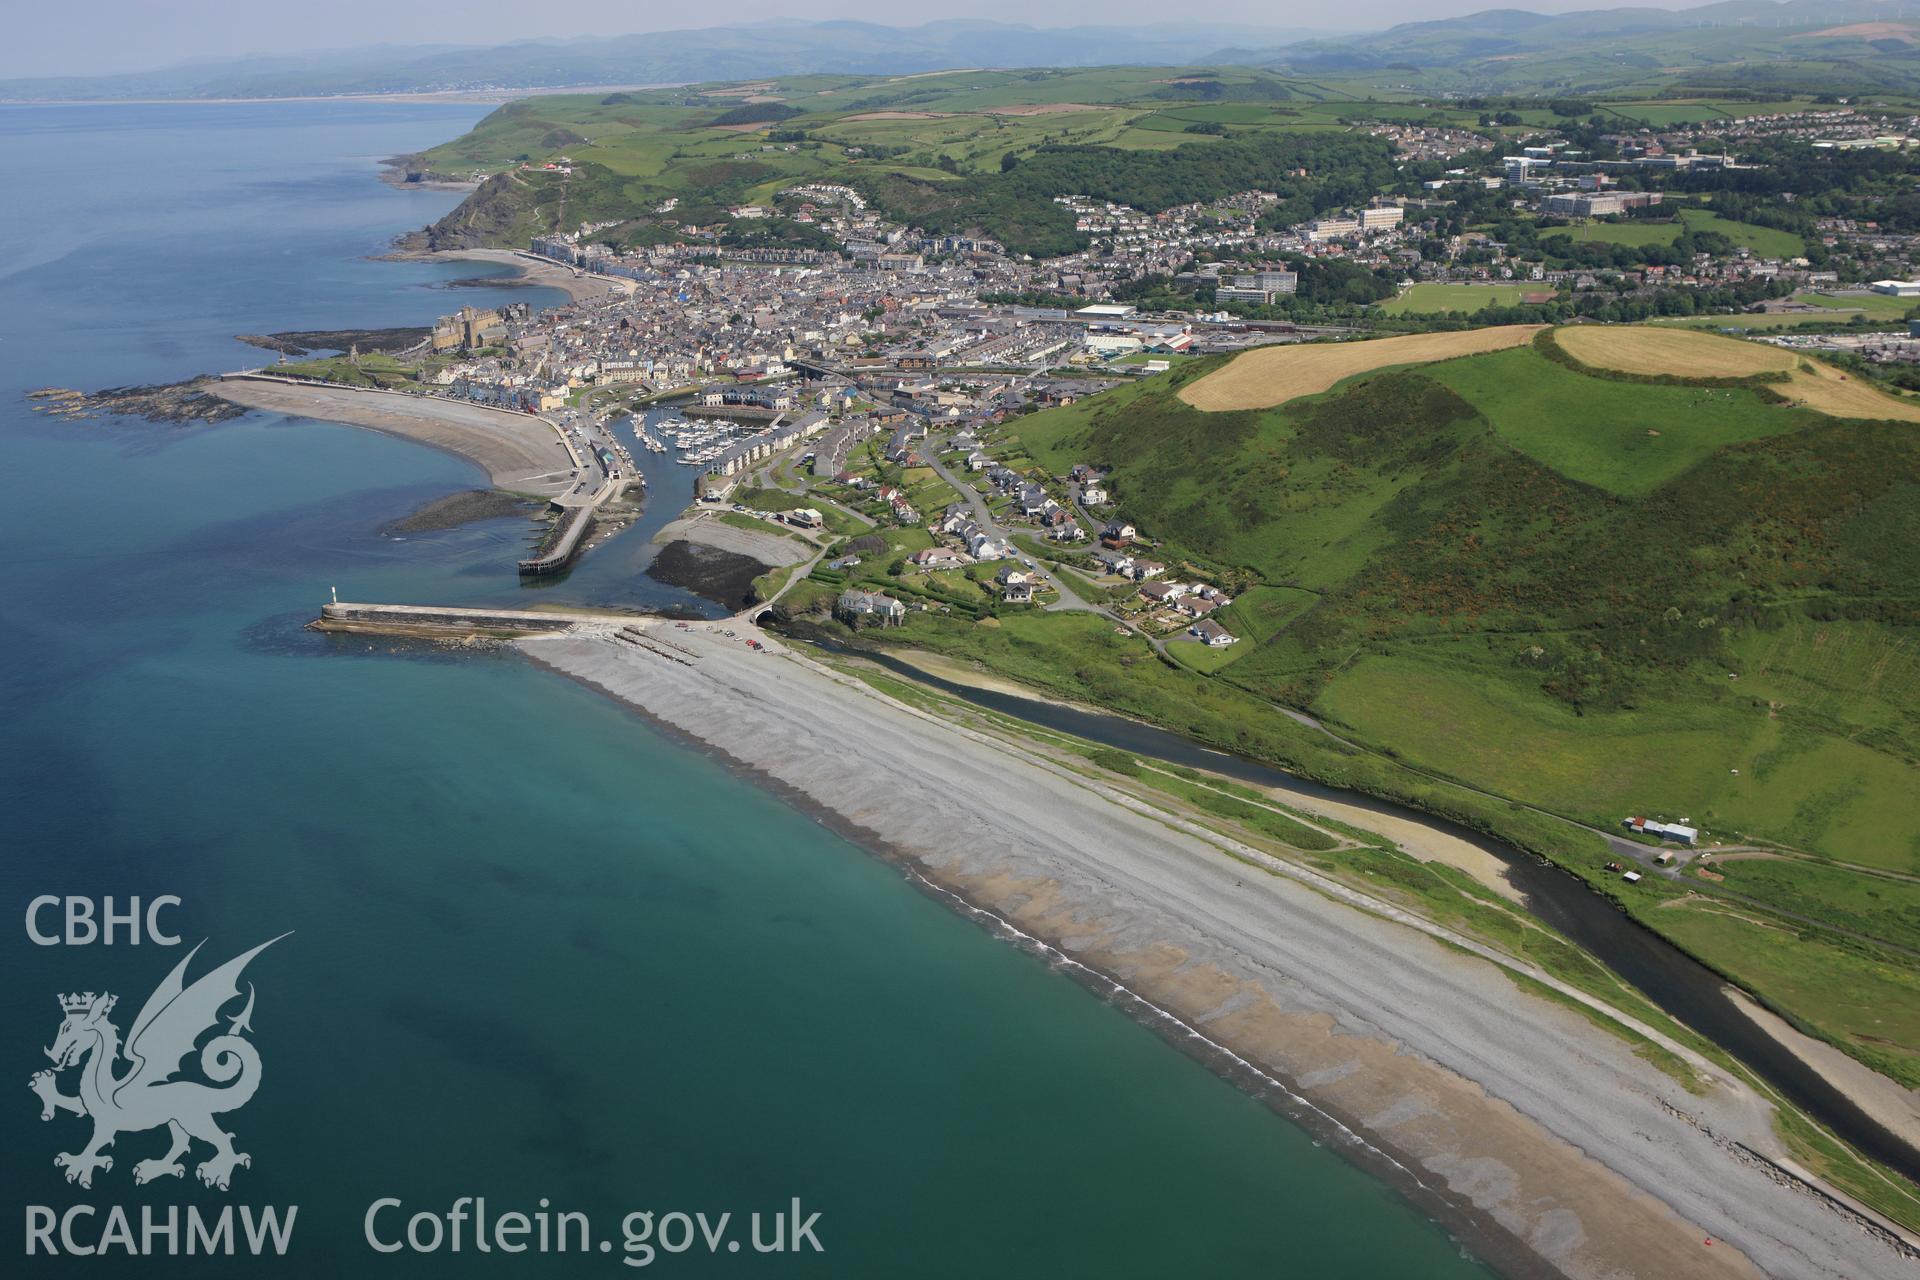 RCAHMW colour oblique aerial photograph of Aberystwyth and surrounding landscape from the south. Taken on 02 June 2009 by Toby Driver